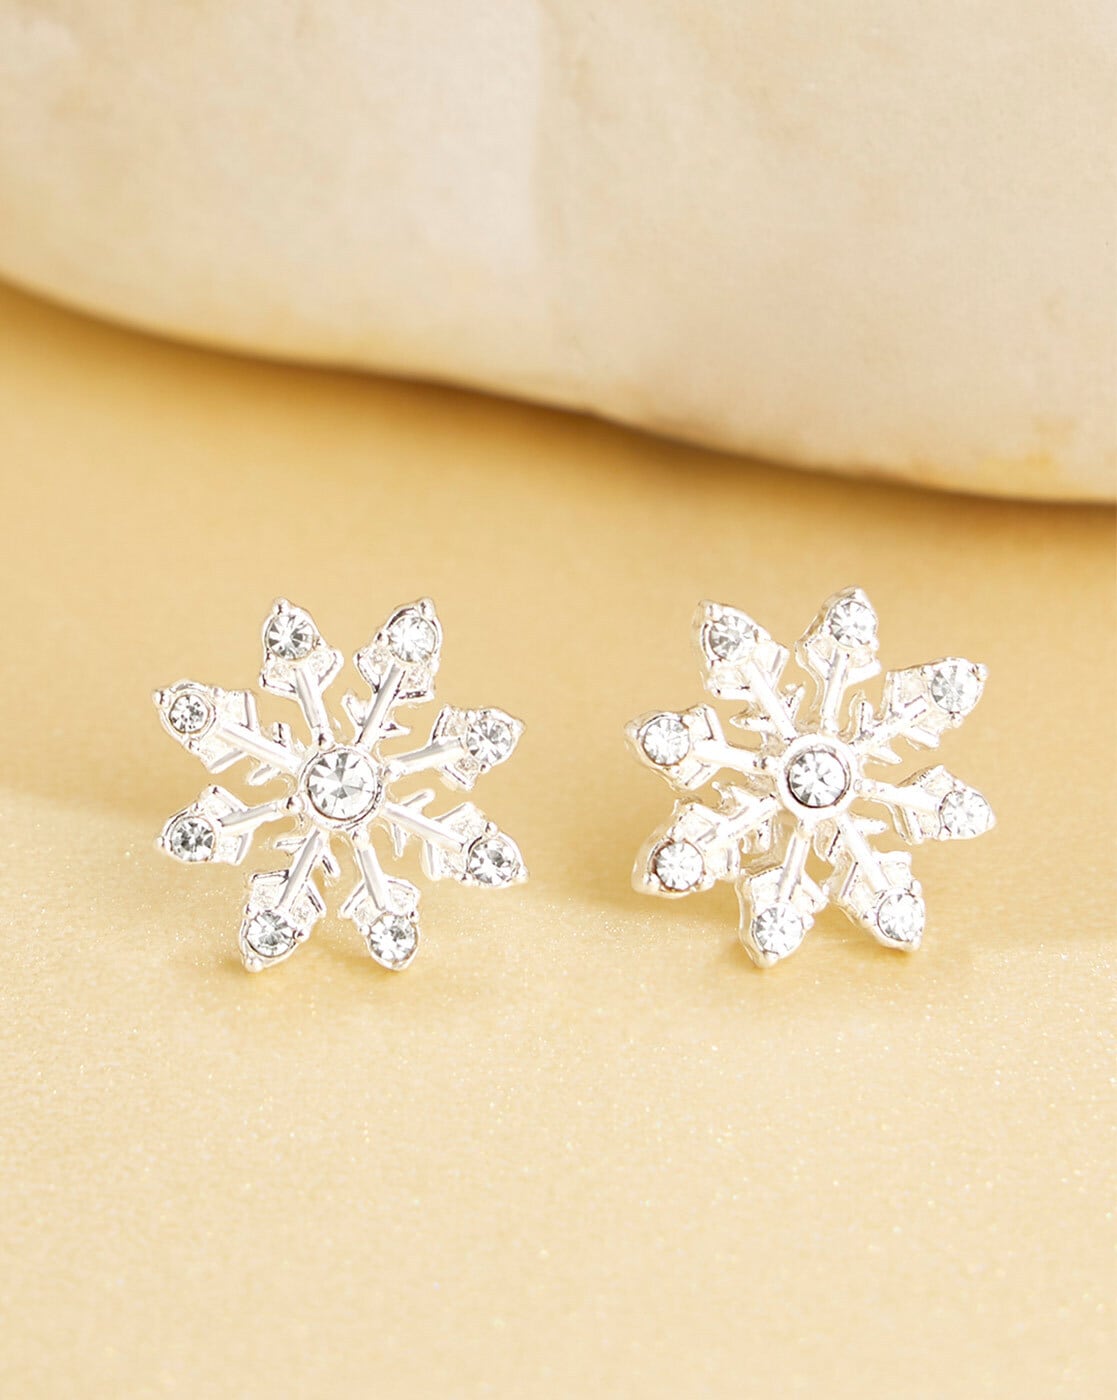 Park City Jewelers Snowflake Collection: Handcrafted Luxury Jewelry